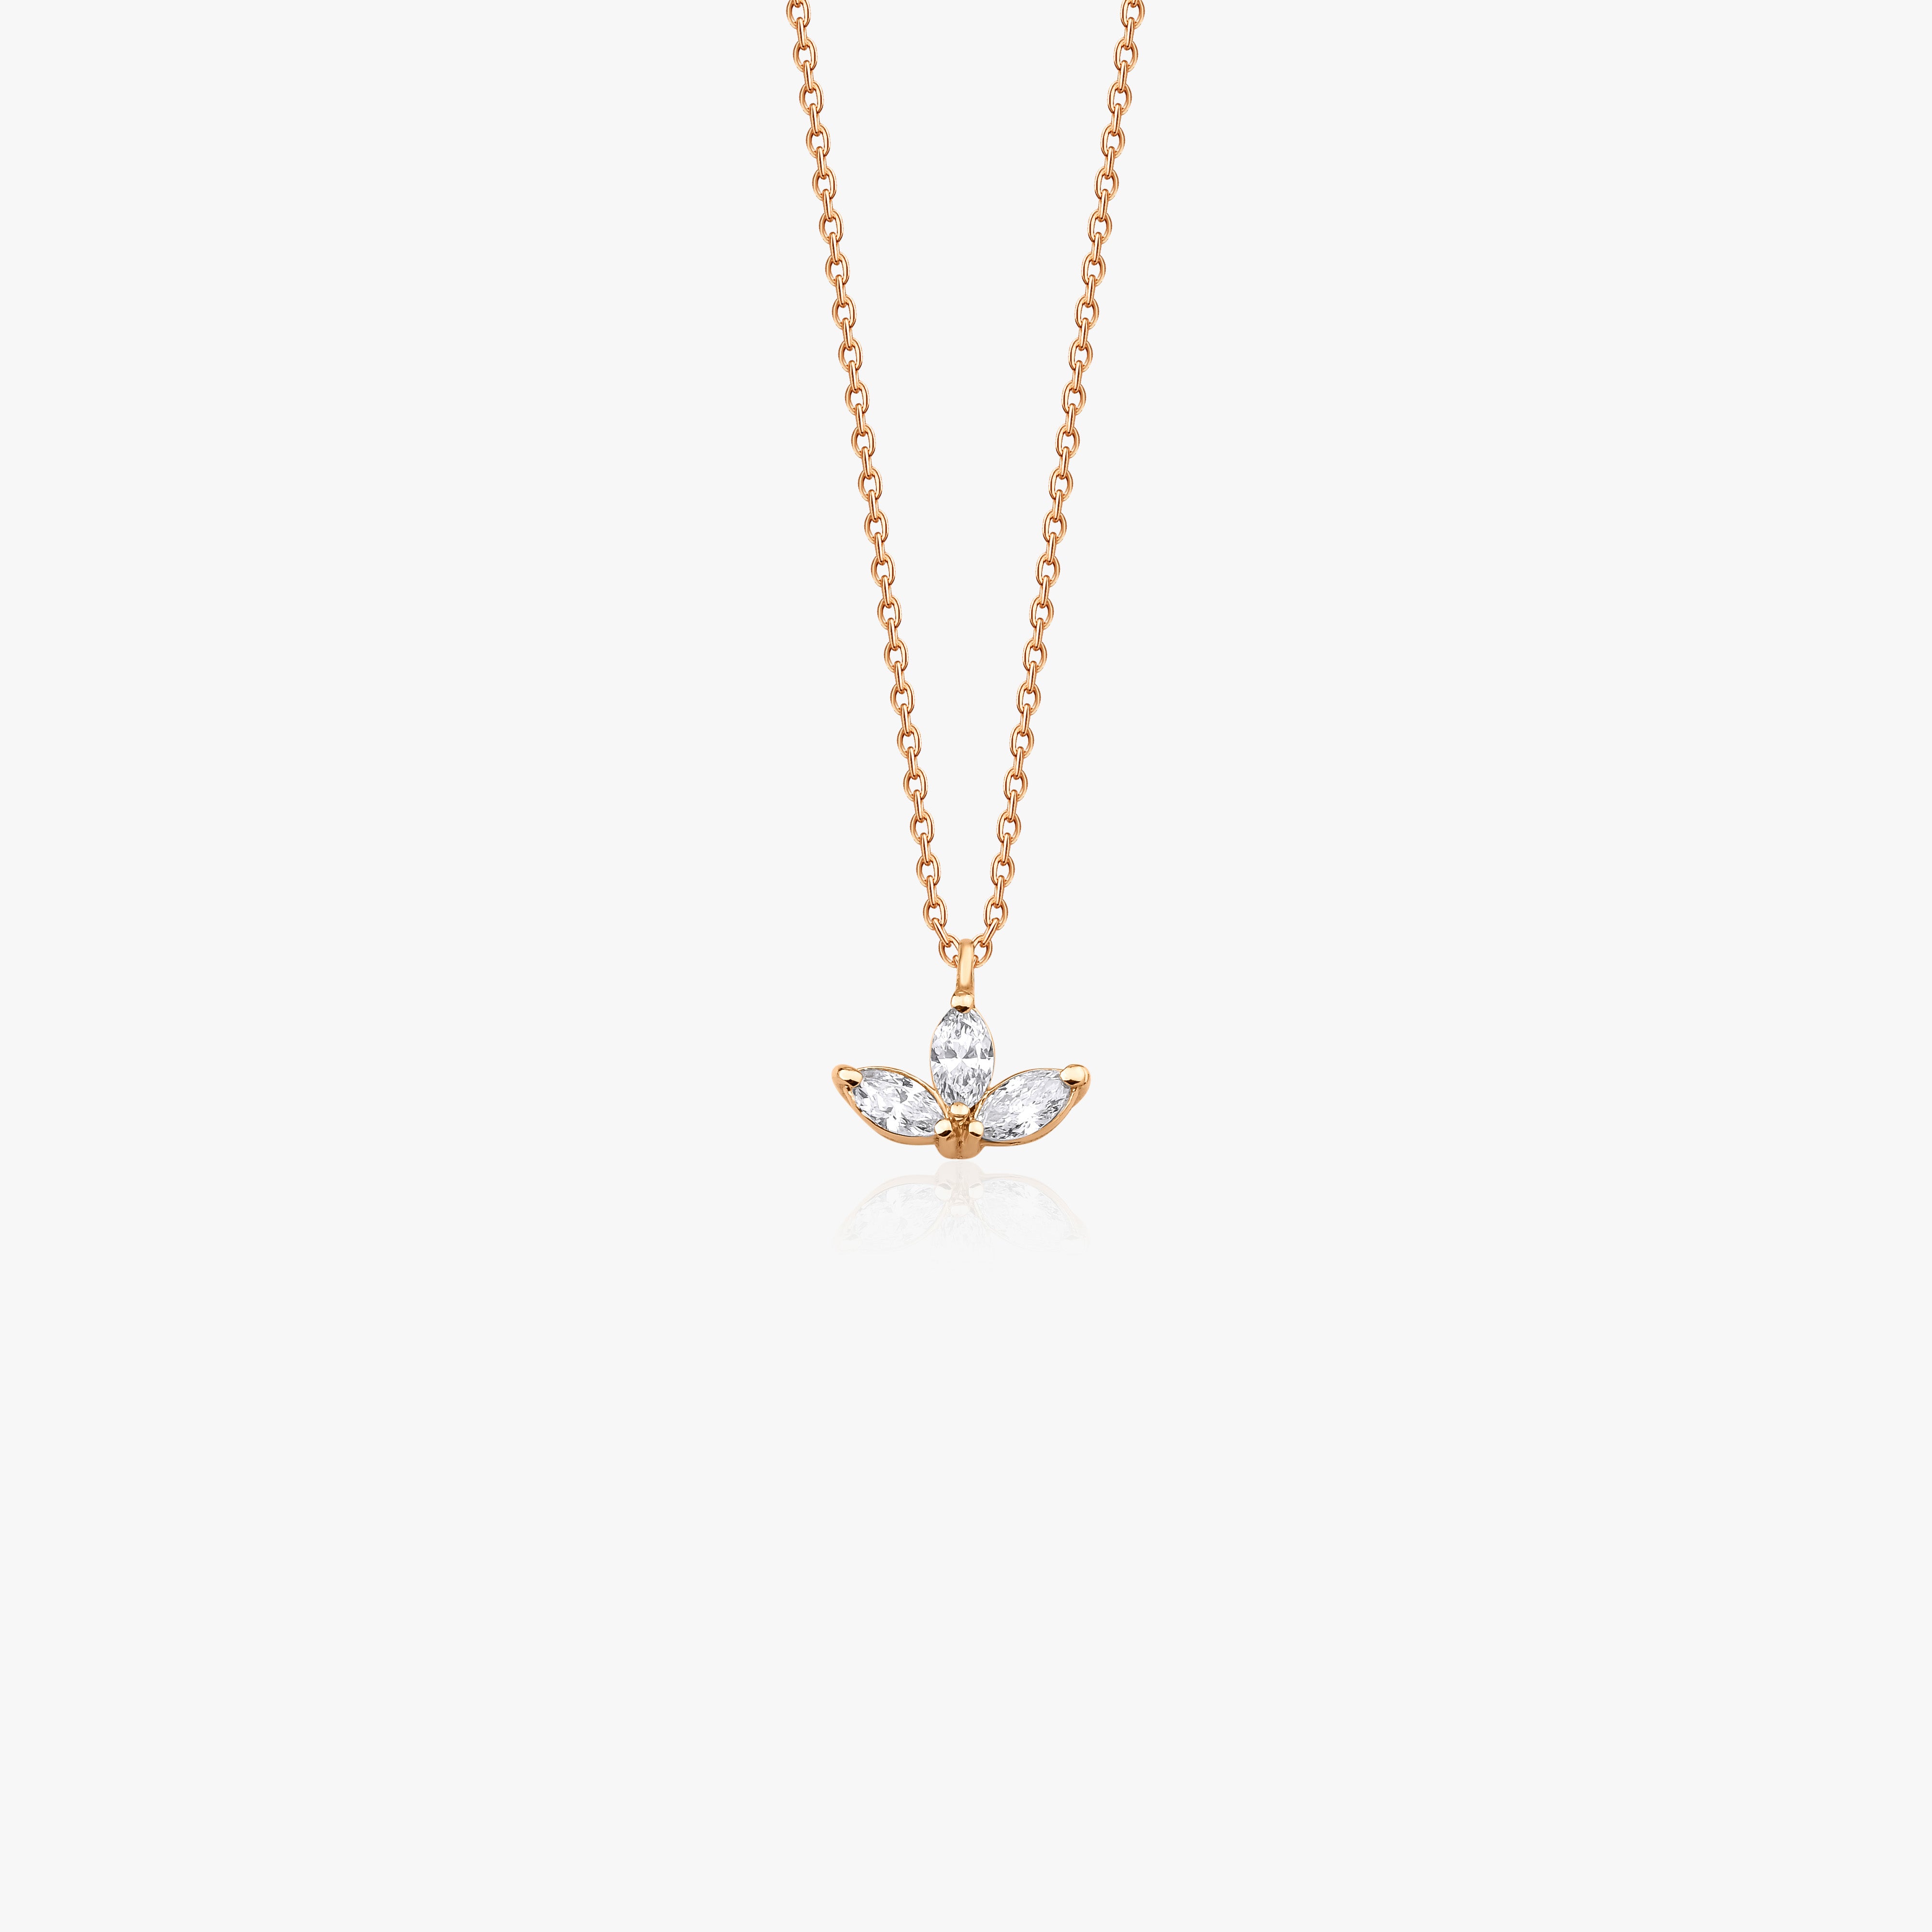 Marquise Diamond Necklace Available in 14K and 18K Gold